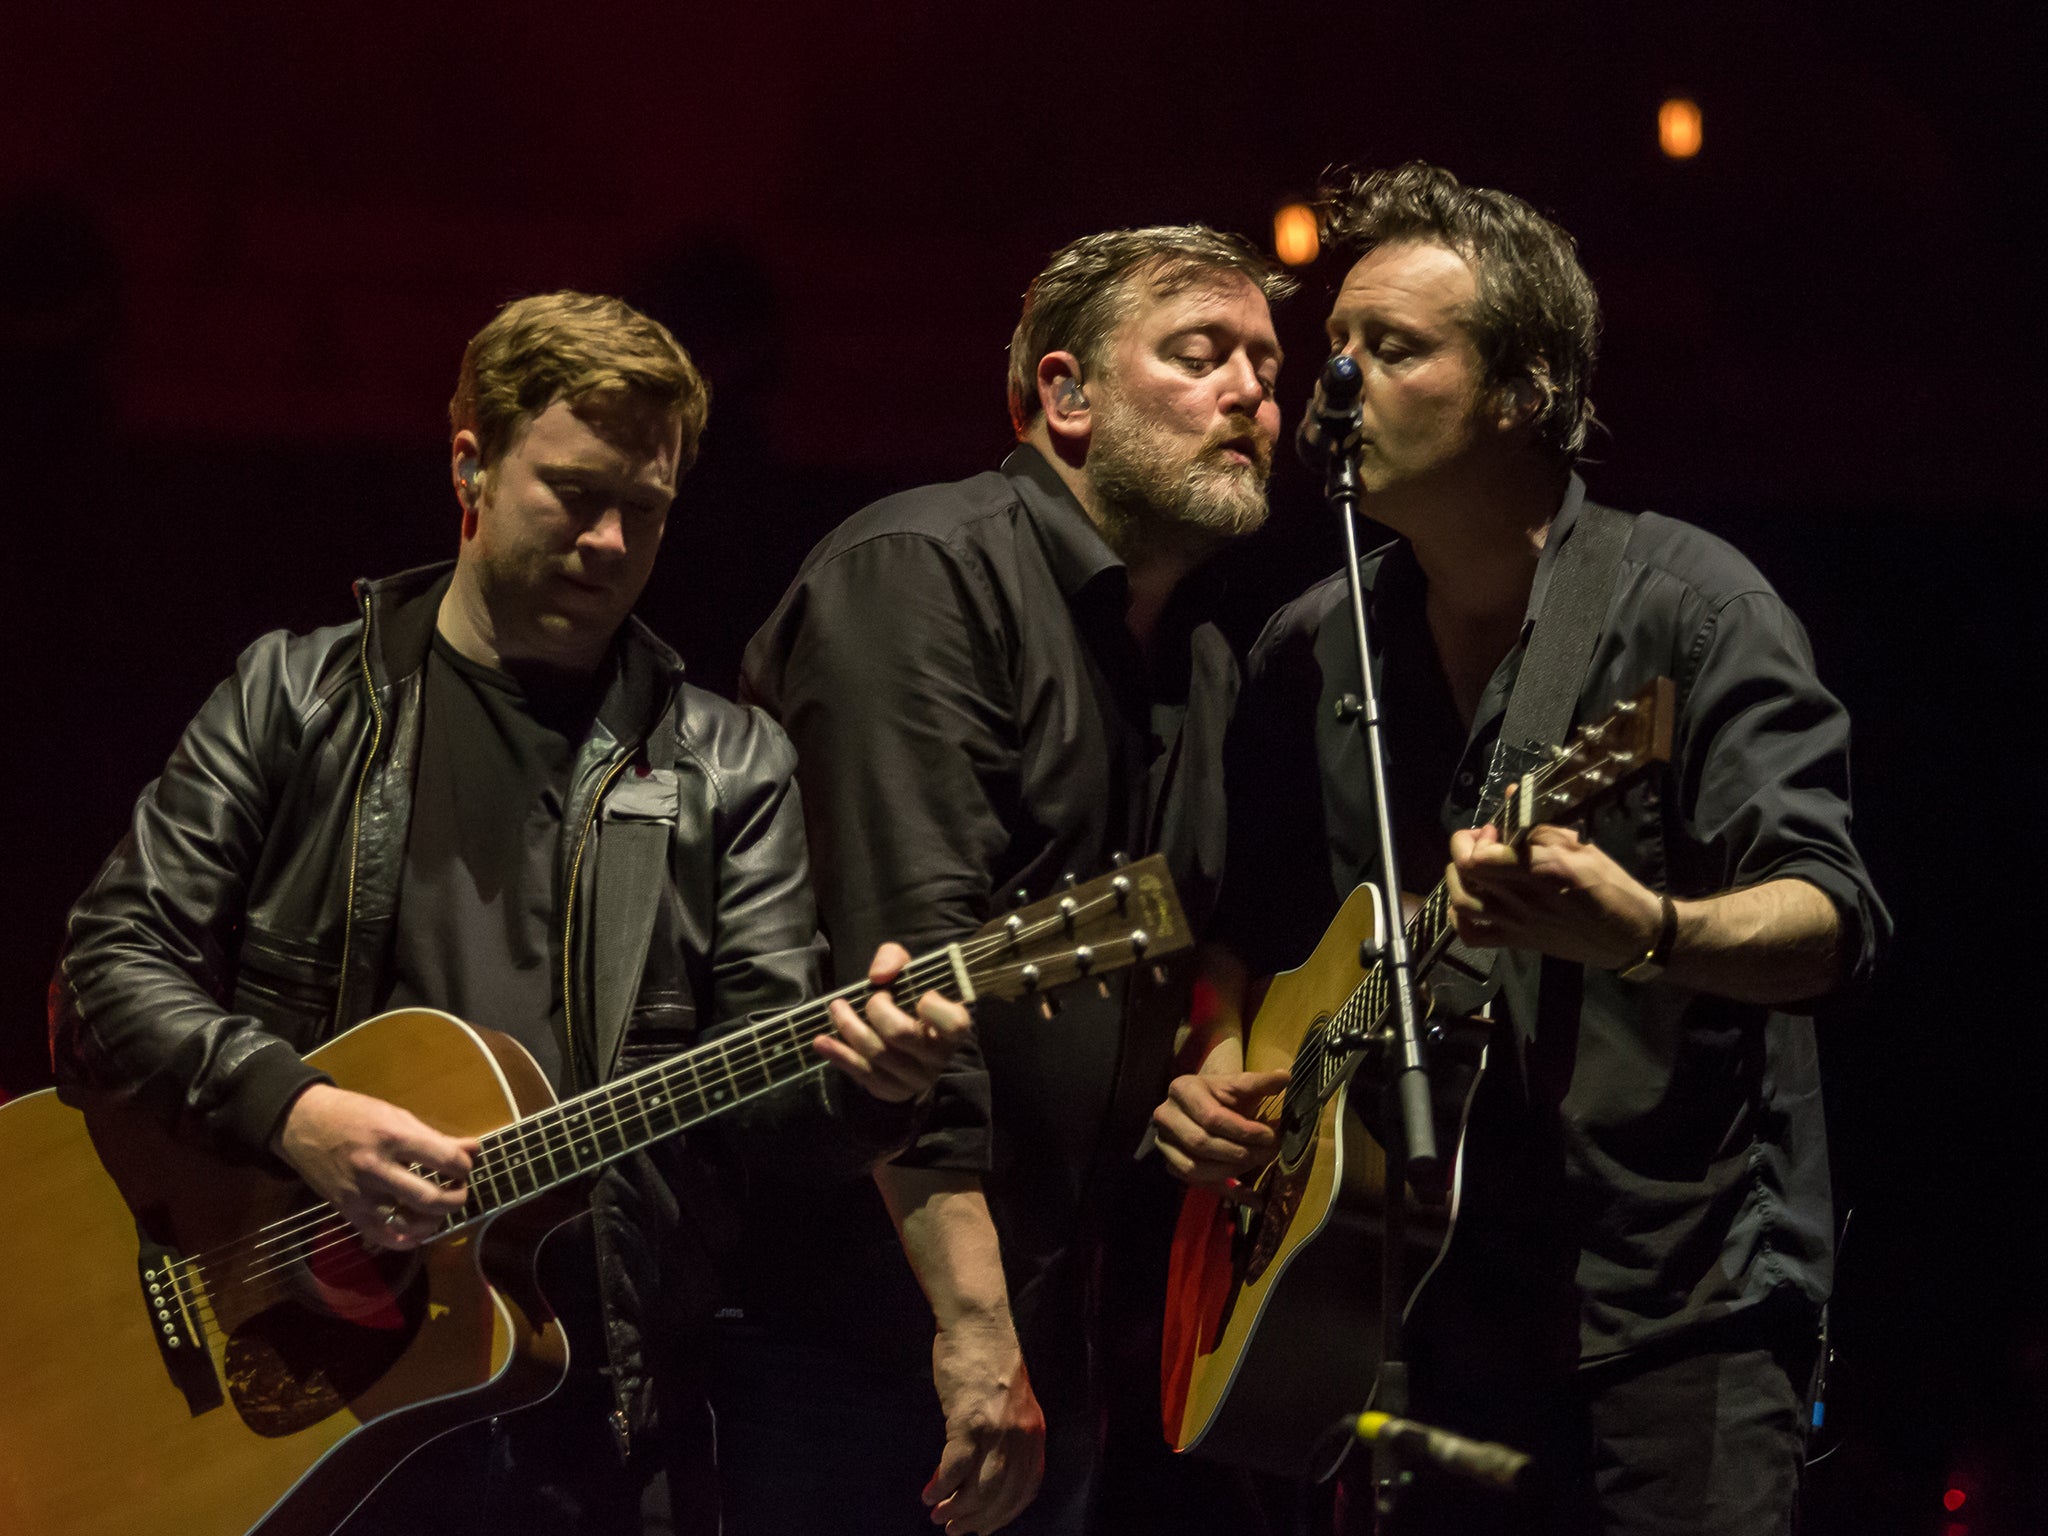 Guy Garvey performs 'I Don't Want To Set The World On Fire' with Nathan Sudders from The Whip (left) and Peter Jobson from I Am Kloot (right)